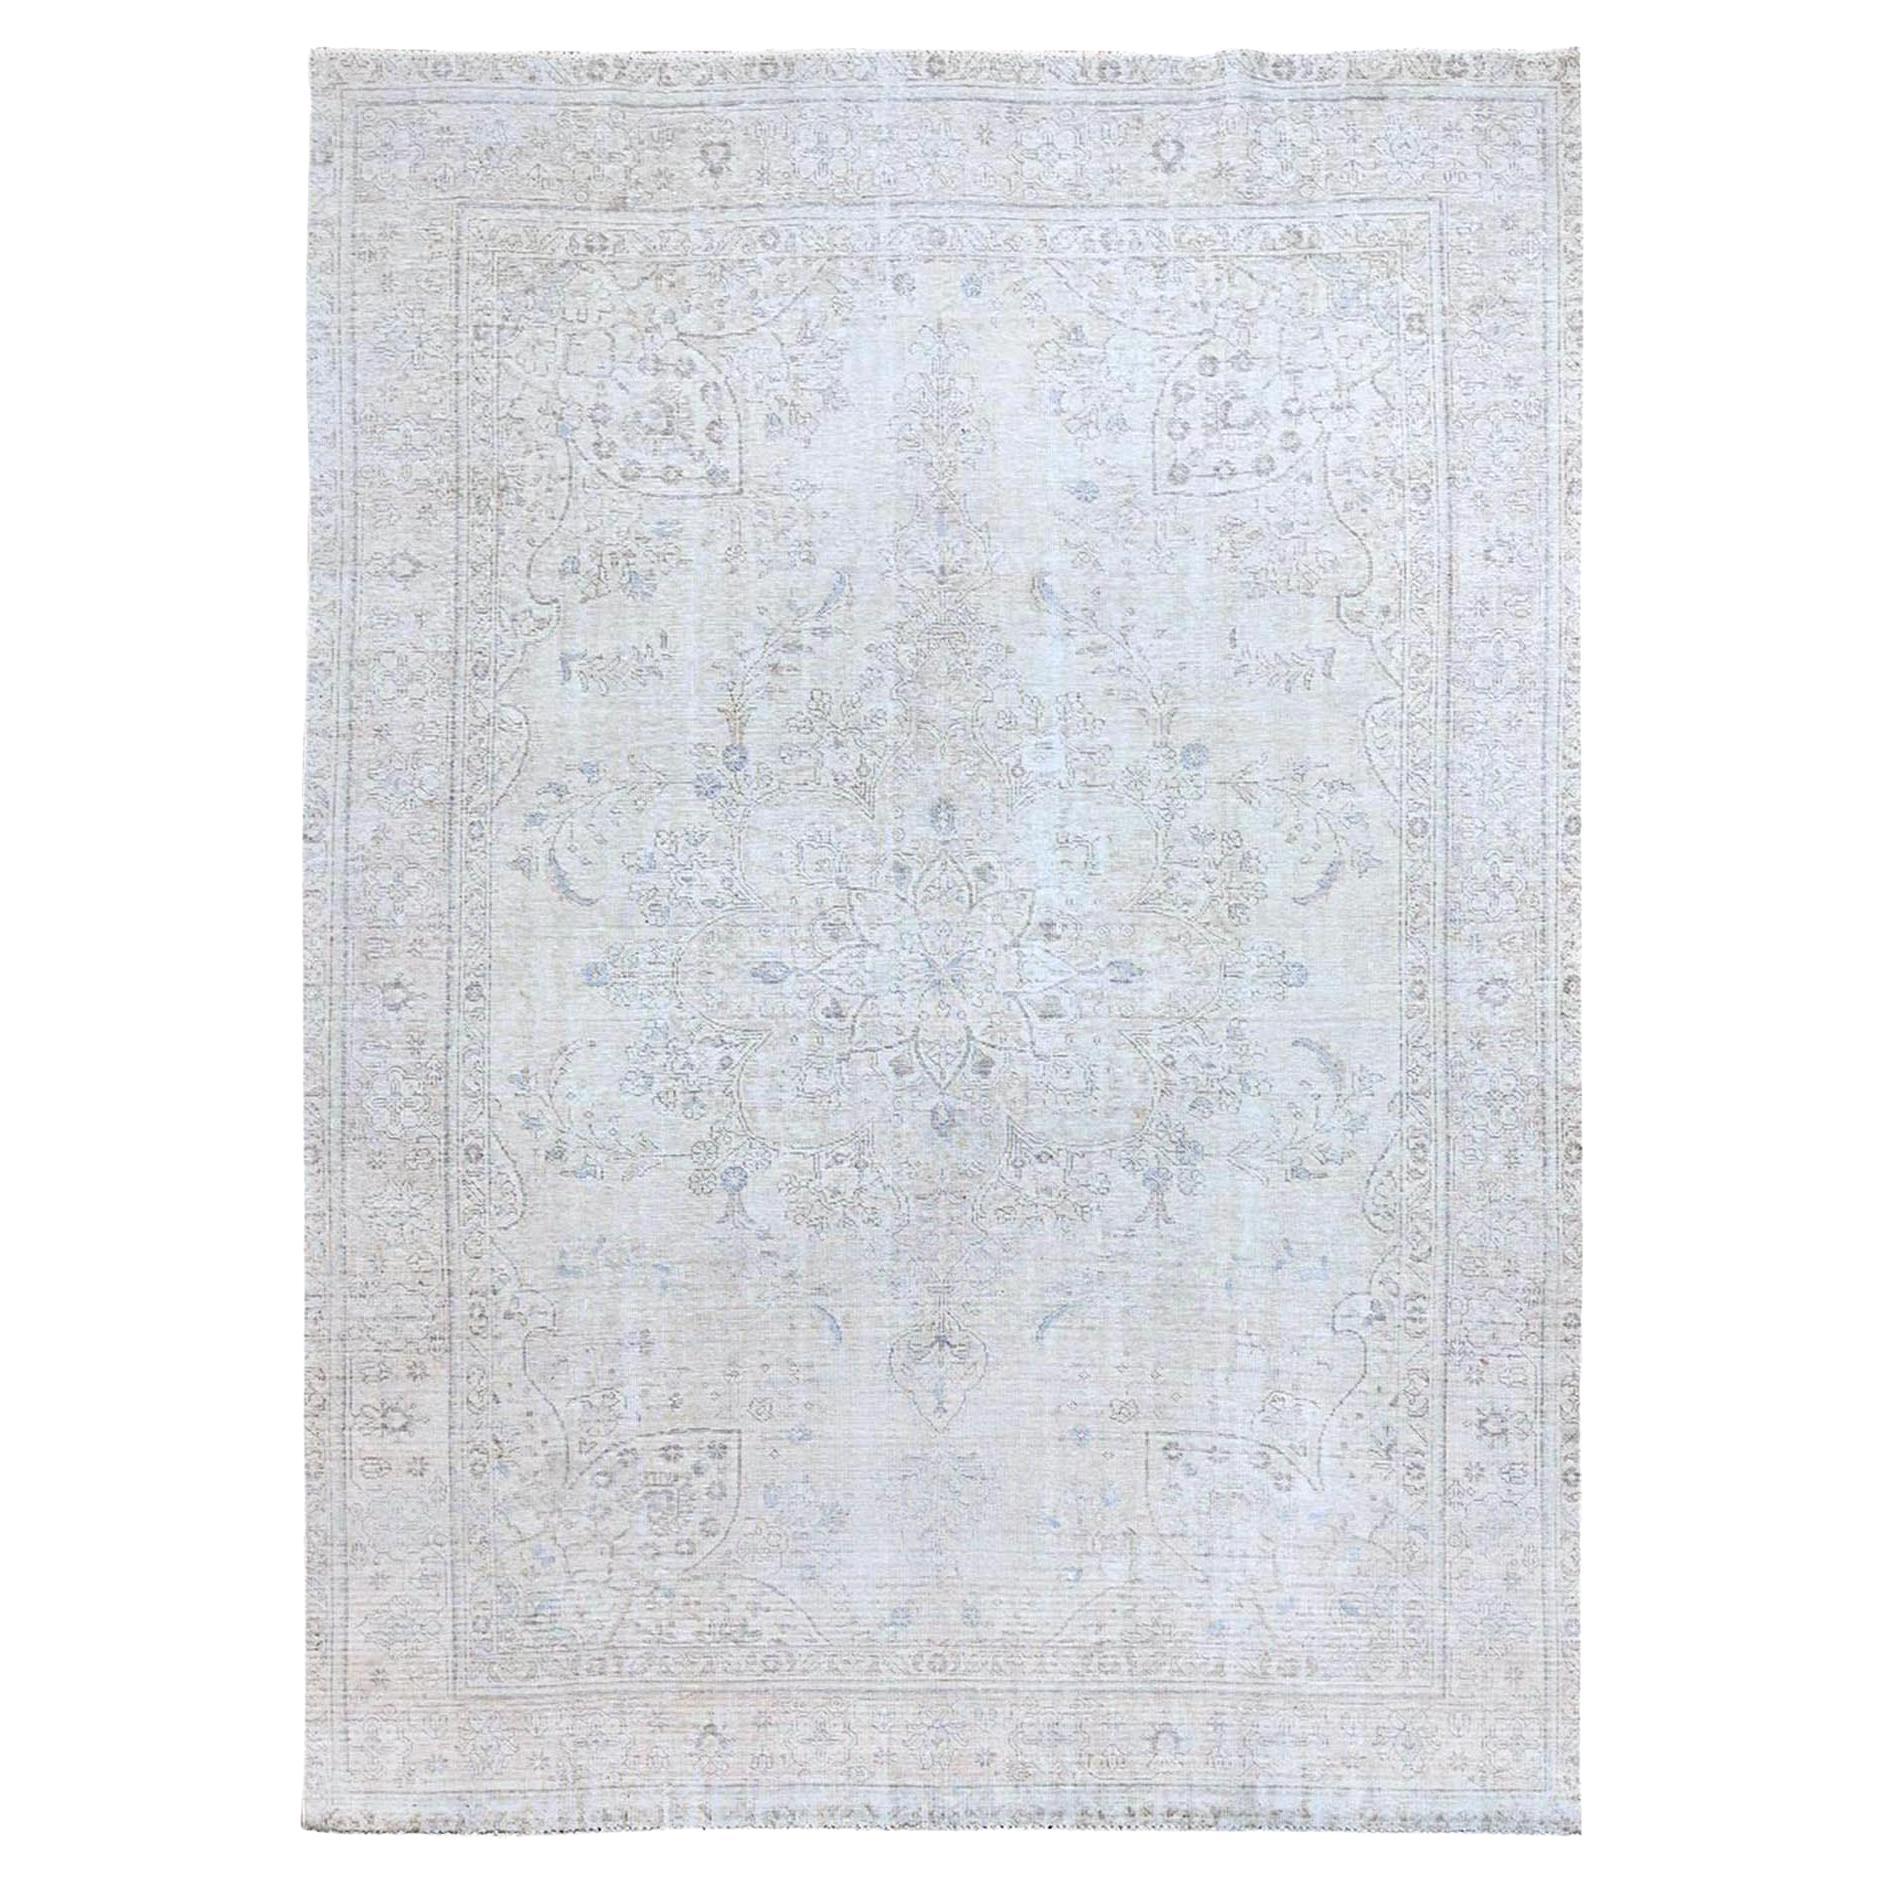 Ivory Vintage Persian Tabriz White Wash Clean Hand Knotted Wool Rustic Look Rug For Sale